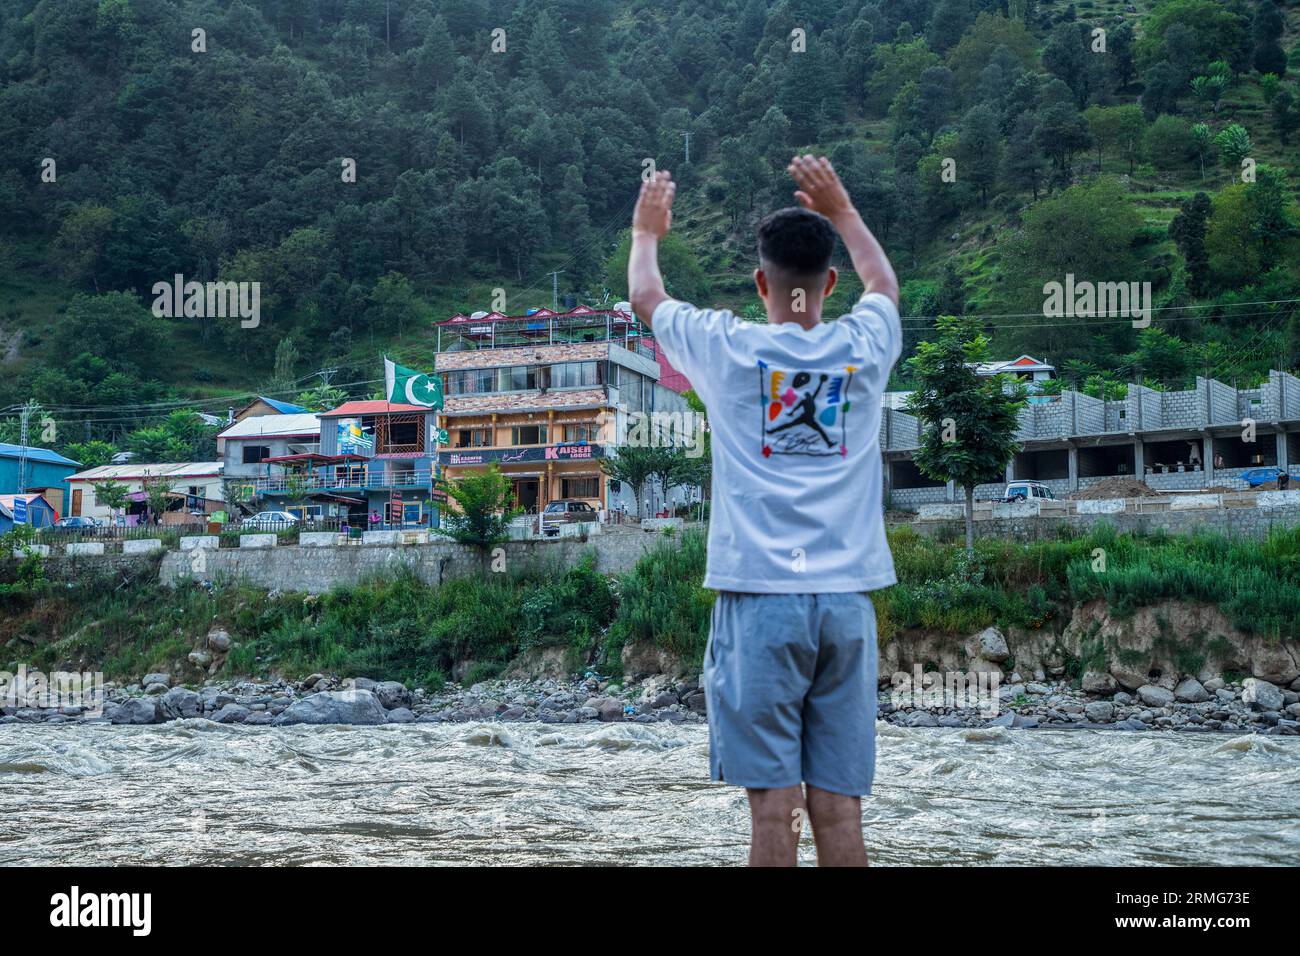 Keran Kupwara, India. 24th Aug, 2023. A local visitor waving to people in Pakistan Administered Kashmir on the banks of Neelam river or Kishan Ganga that has divided Kashmir into two parts controlled by nuclear rivals India and Pakistan. The river acts as a disputed line of control and flows through a village called Keran from both sides which is located on the northern side of Indian Kashmir's Border district Kupwara some 150kms from Srinagar and 93kms from Muzaffarabad, in the Pakistan side of Kashmir. (Photo by Faisal Bashir/SOPA Images/Sipa USA) Credit: Sipa USA/Alamy Live News Stock Photo